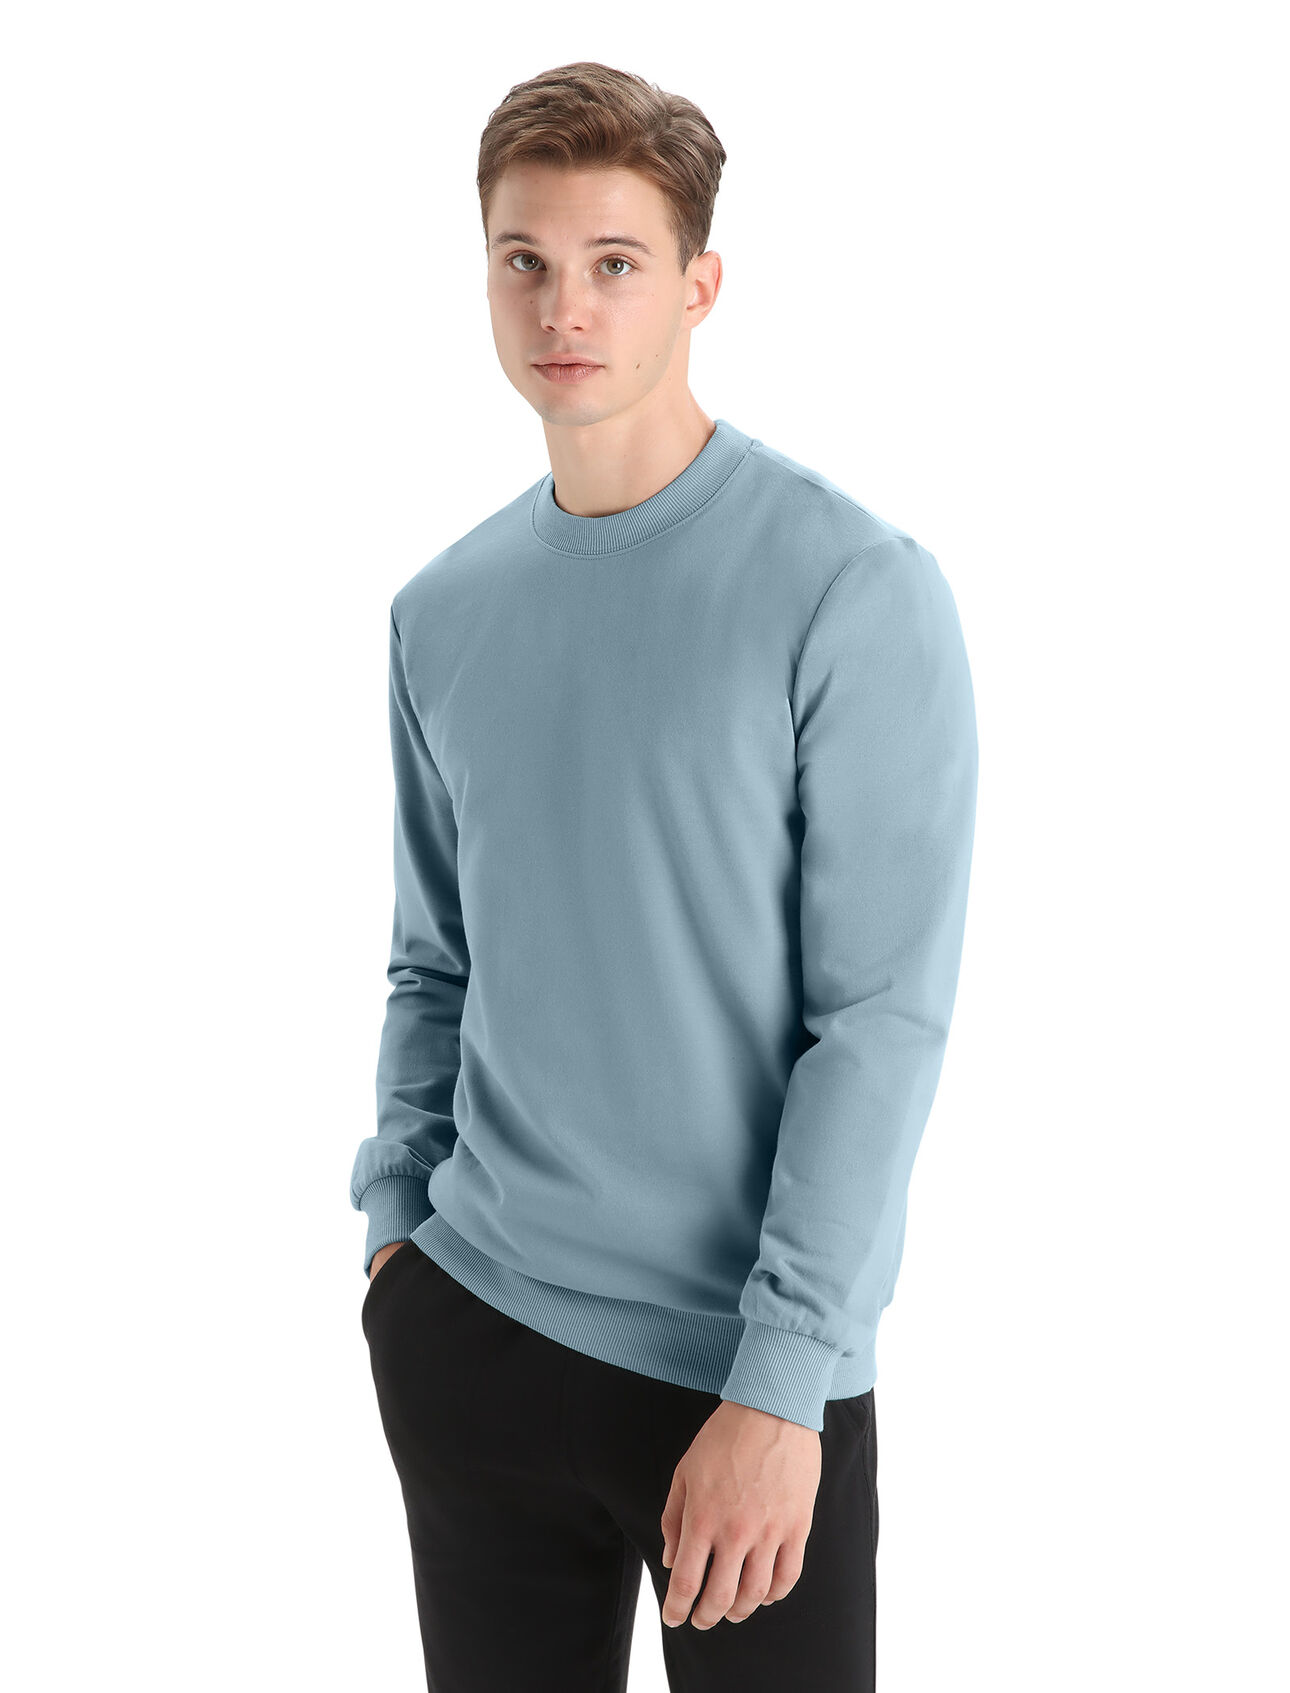 Mens Merino Central II Long Sleeve Sweatshirt A versatile, everyday pullover that goes anywhere in comfort, the Central II Long Sleeve Sweatshirt features a sustainable blend of natural merino wool and soft organic cotton.